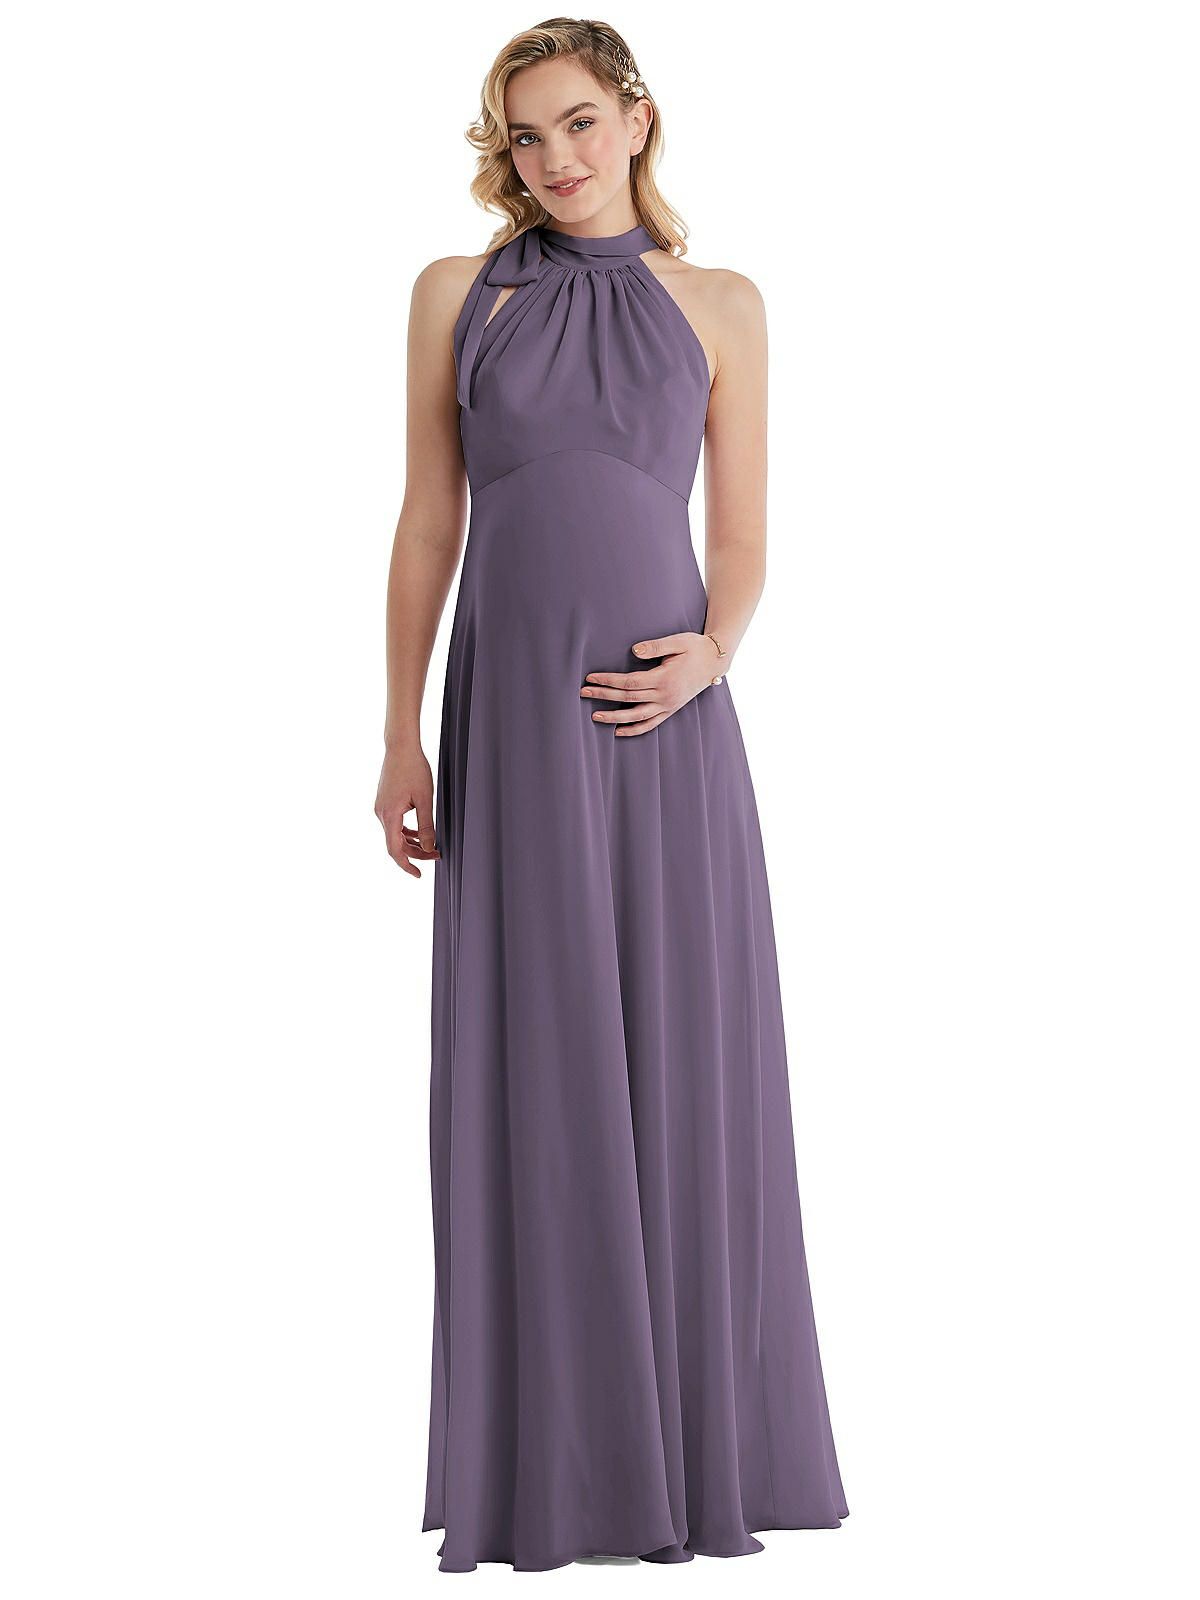 Scarf Tie High Neck Halter Chiffon Maternity Dress in Lavender | The Dessy Group